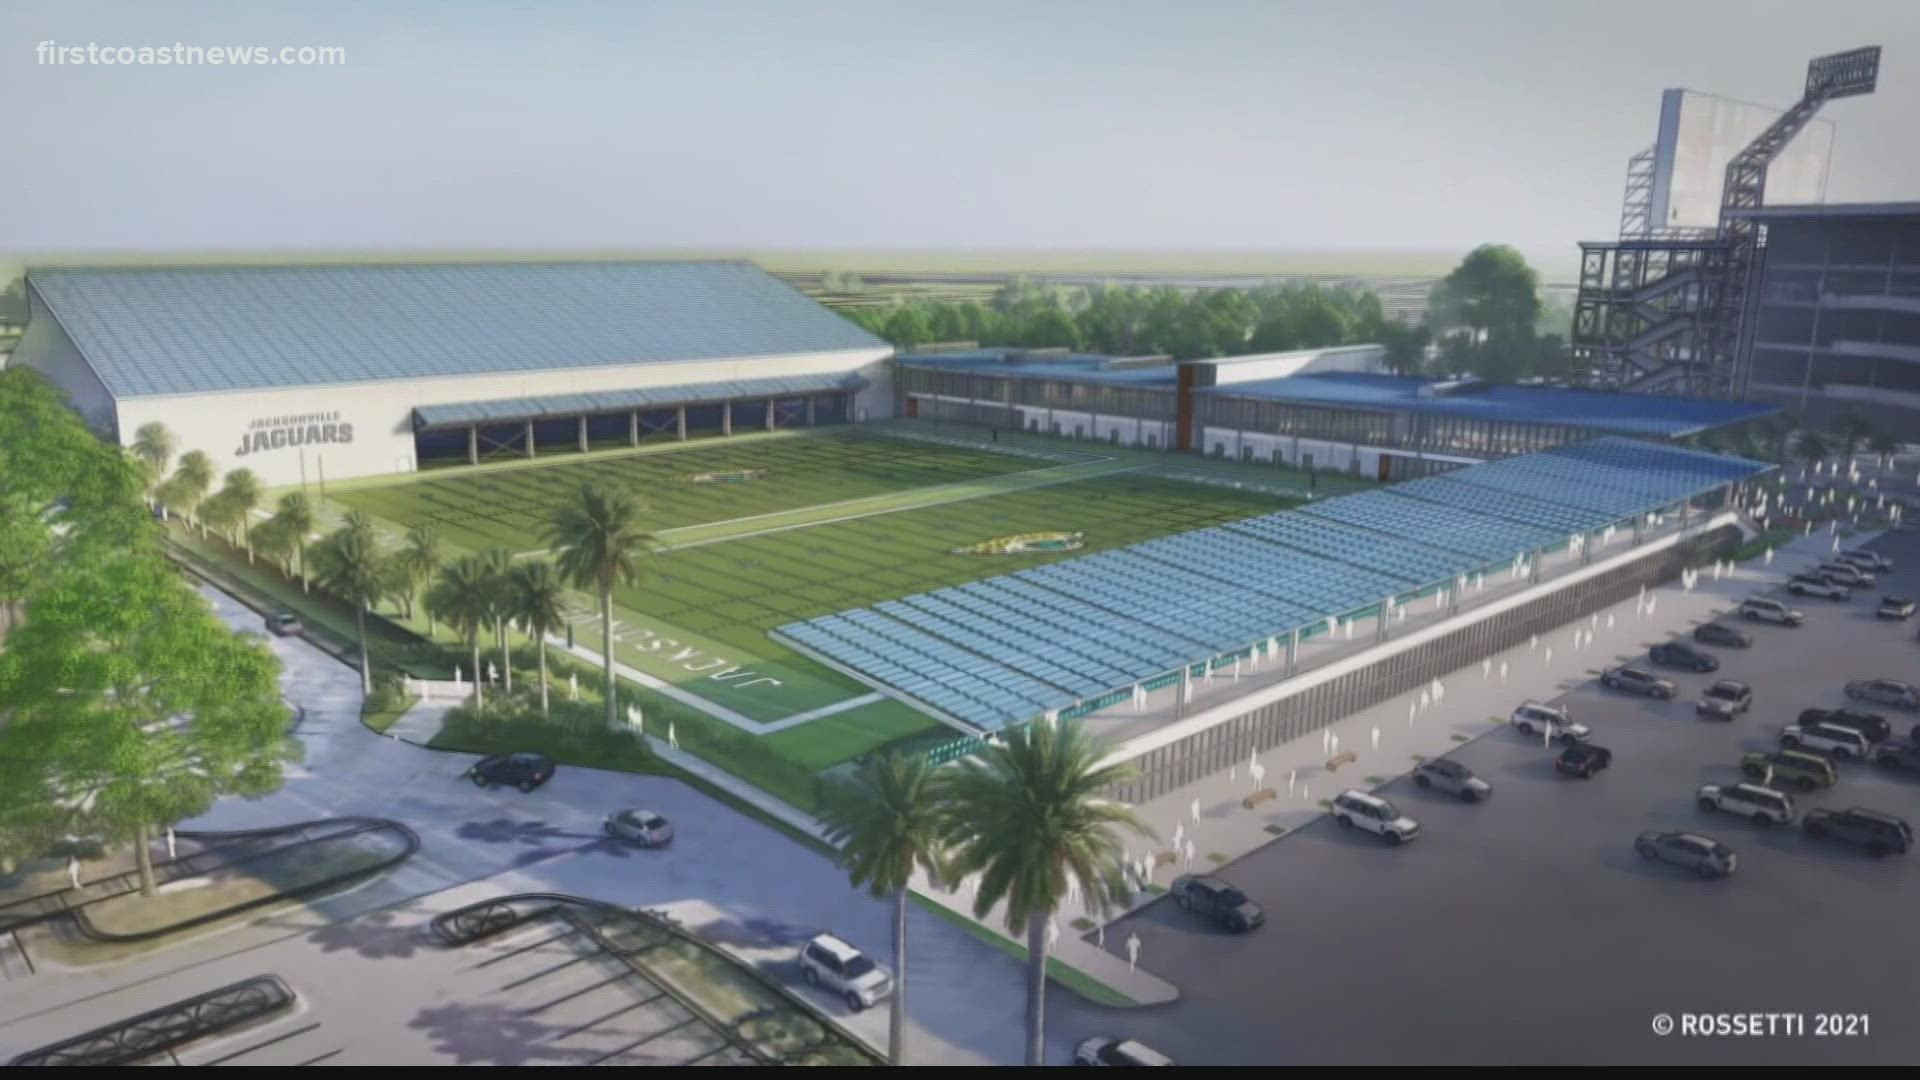 You may have noticed the black fencing by the practice field at Lot J. It's part of a new $120 million sports complex where construction is planned to start soon.